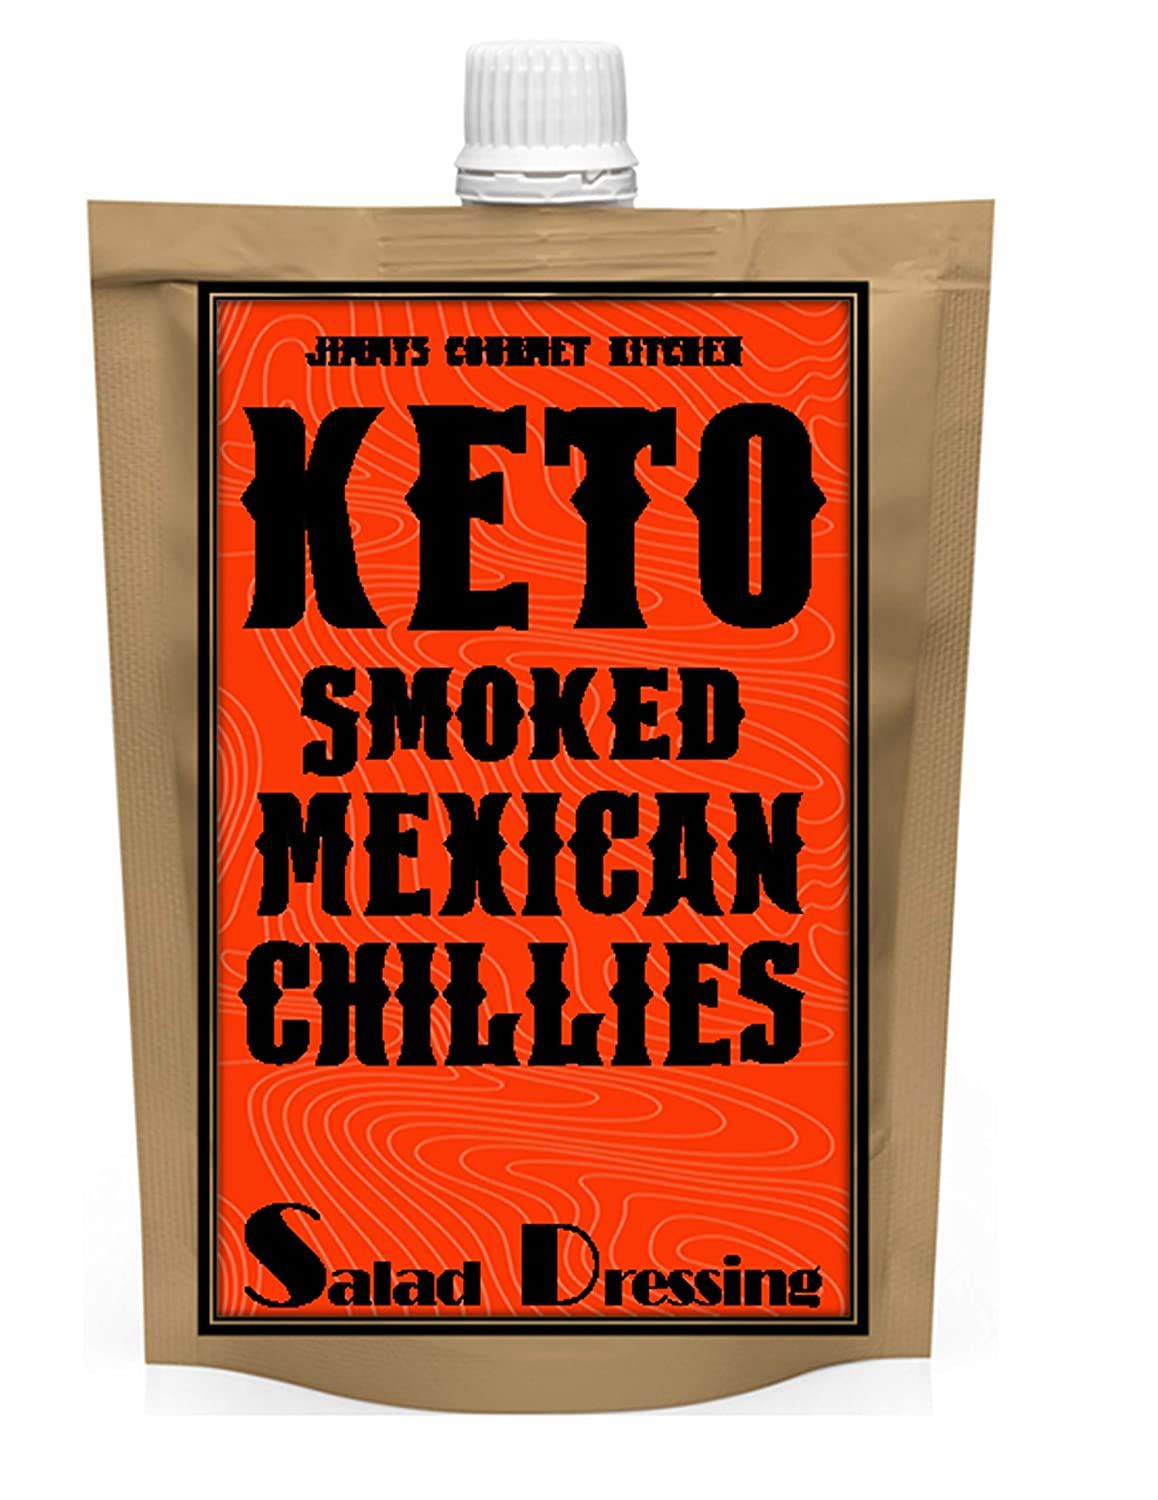 Jimmy's Gourmet Kitchen Keto Salad Dressing Smoked Mexican Chilies Image